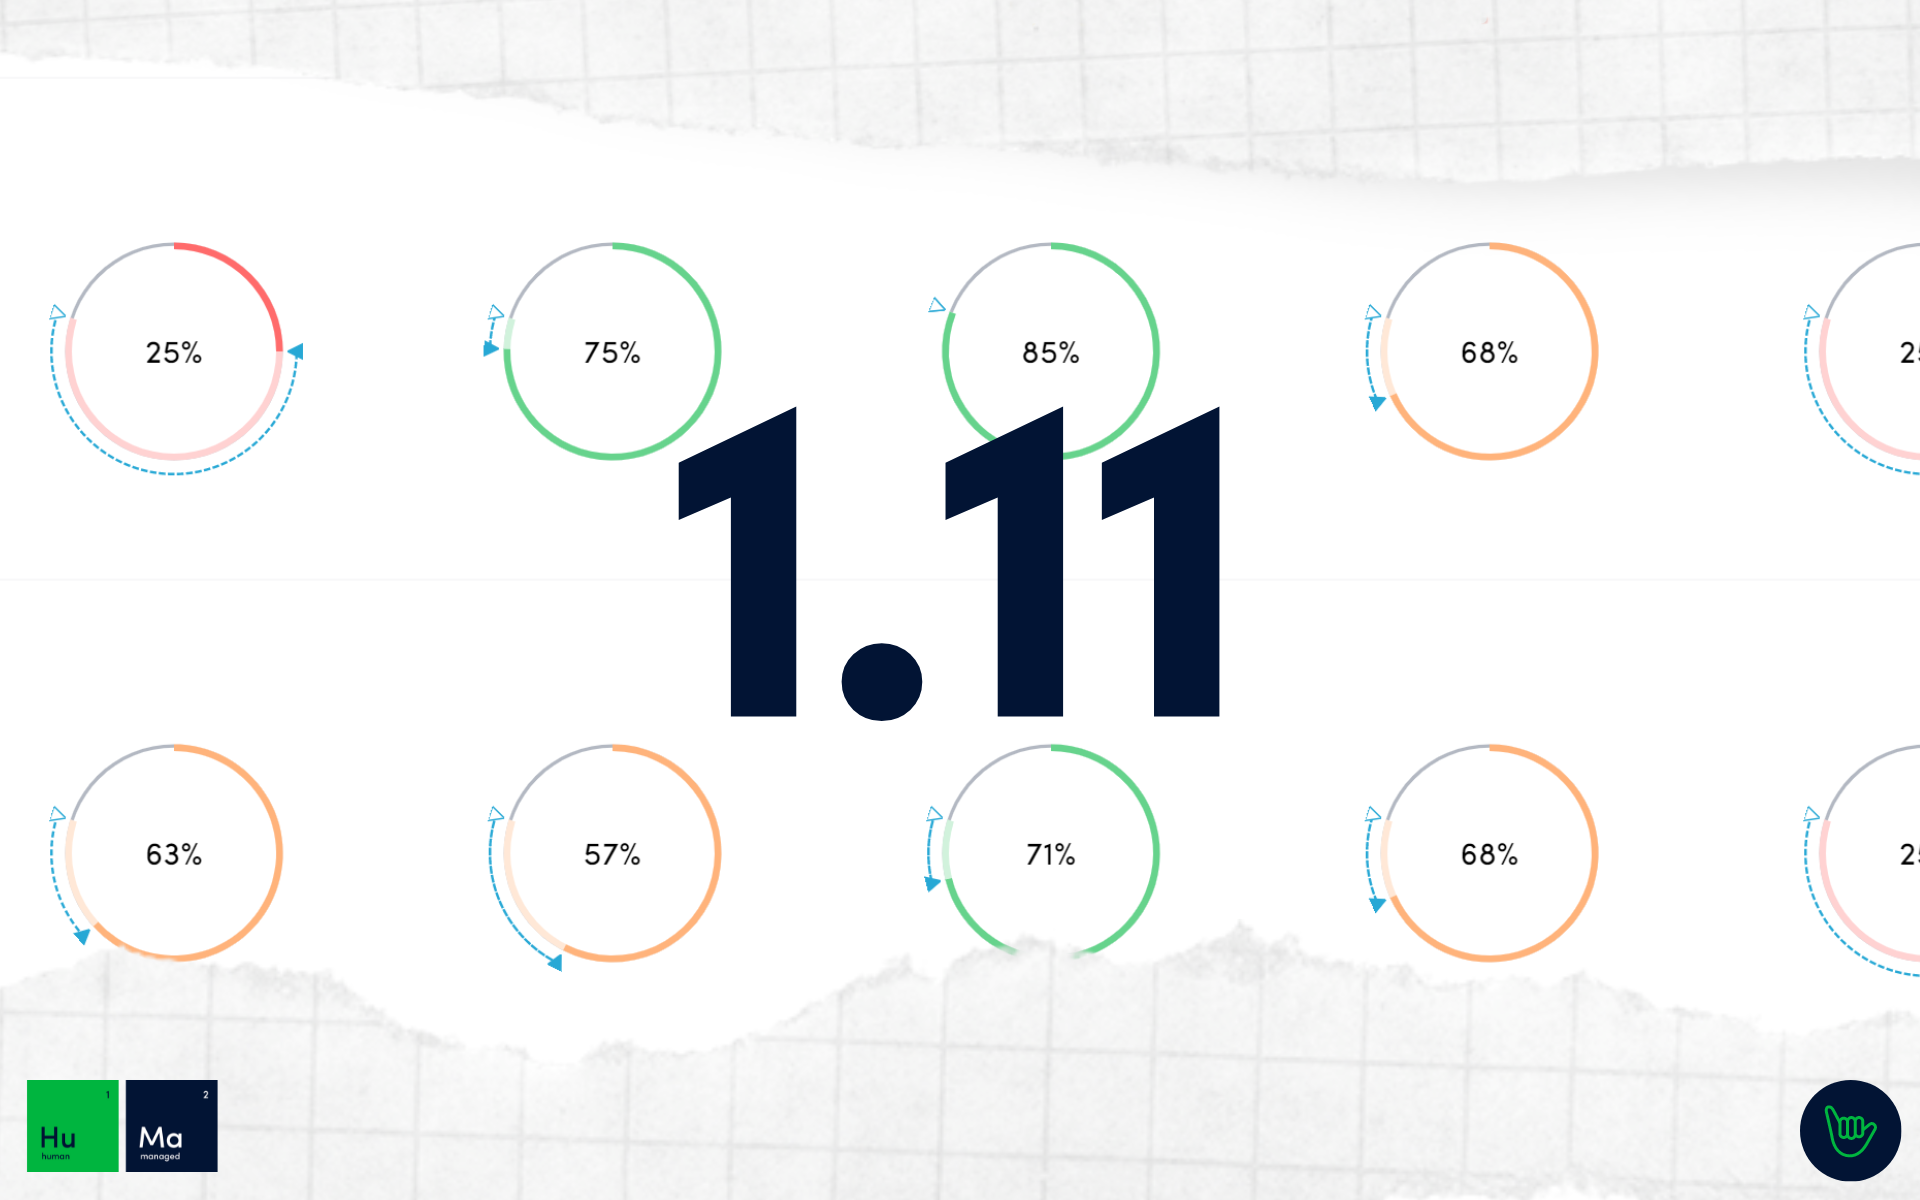 Human Managed hm.works 1.11 released with cyber posture scorecard by category